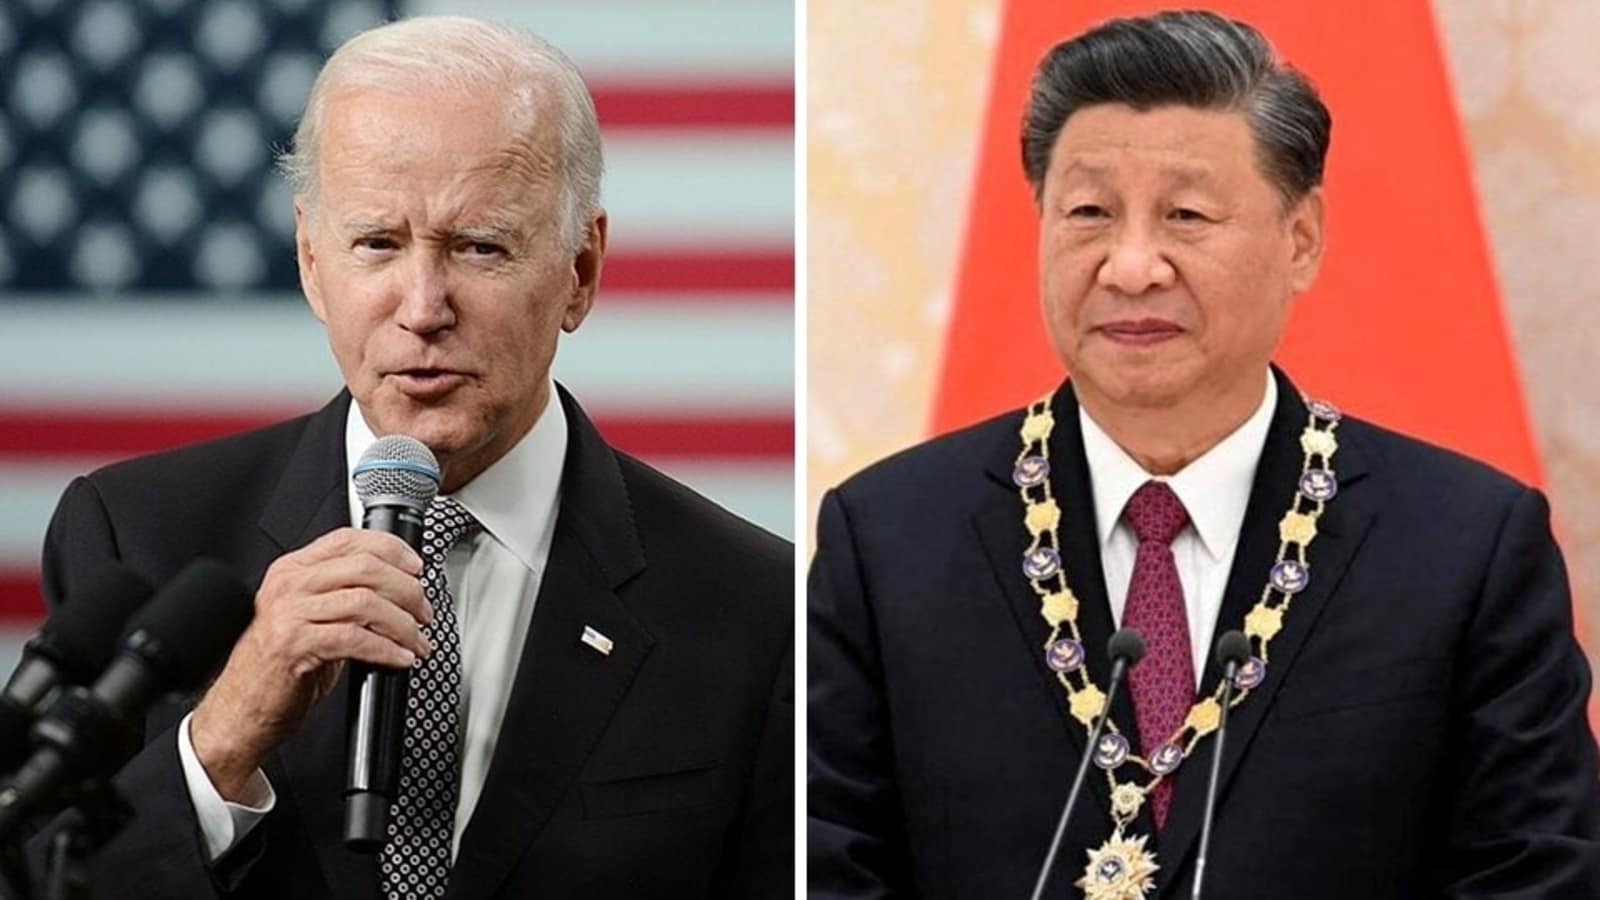 Global chip stocks tumble as Biden expands technology curbs on China: Report